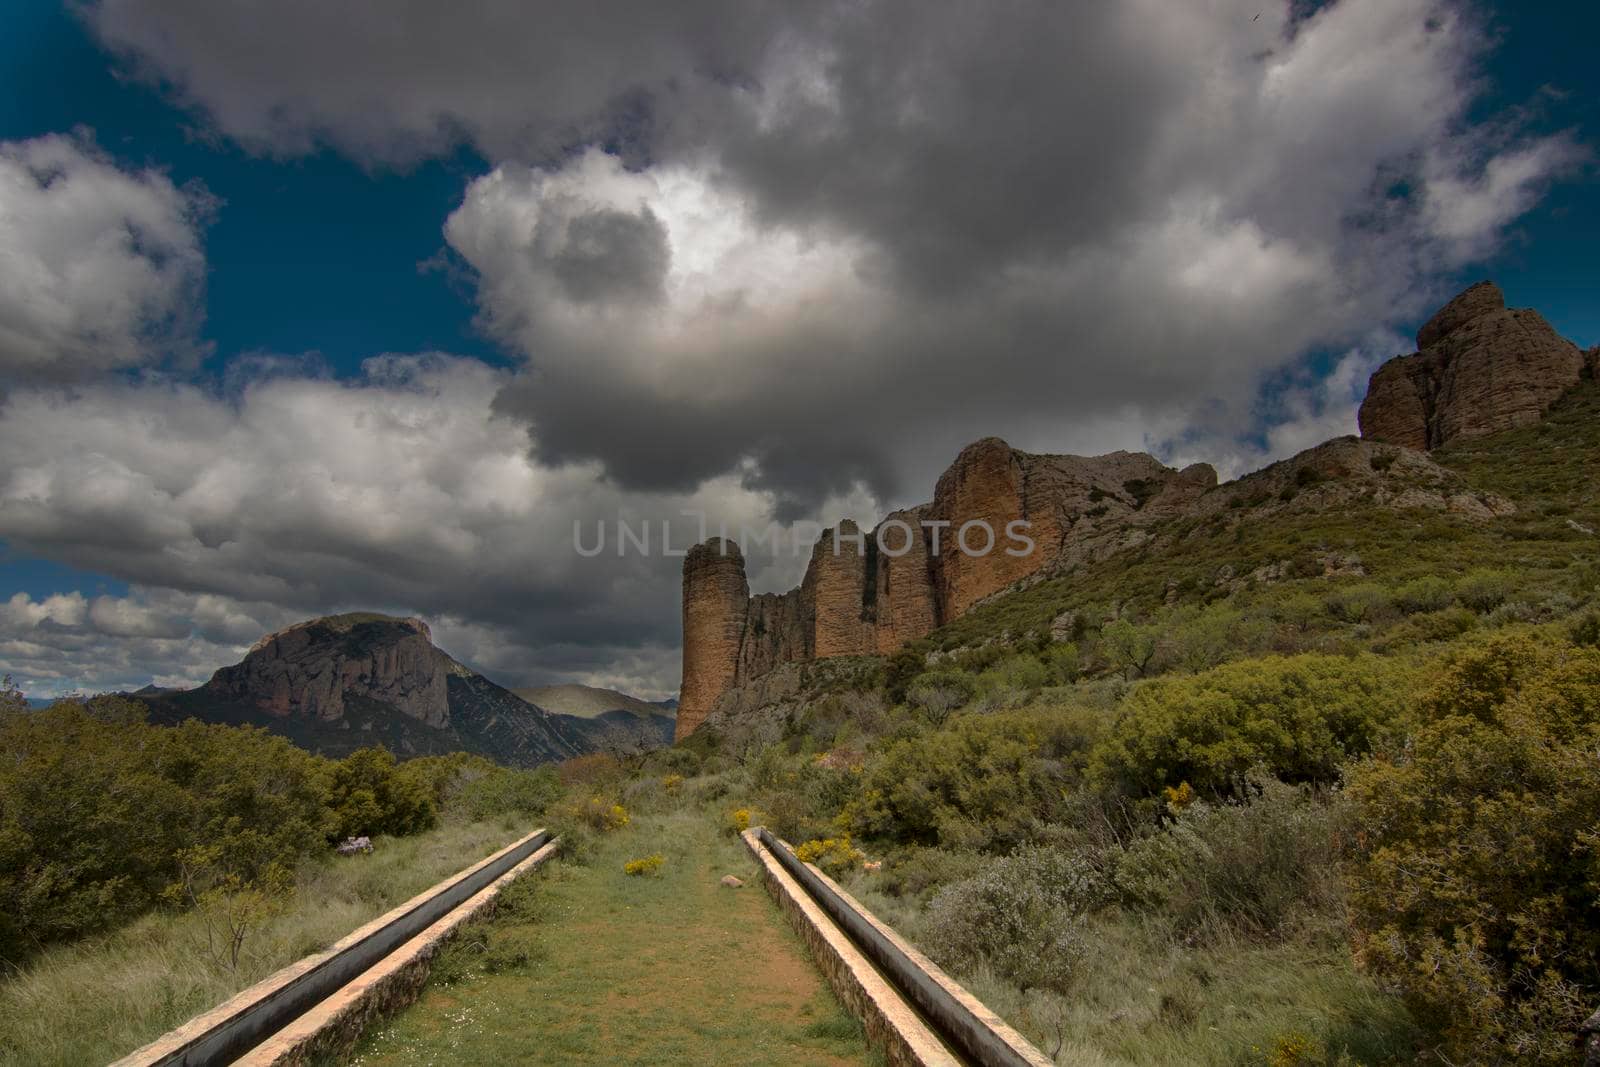 Vertical mountains called Mallos de Riglos under a cloudy sky in Huesca province in Spain